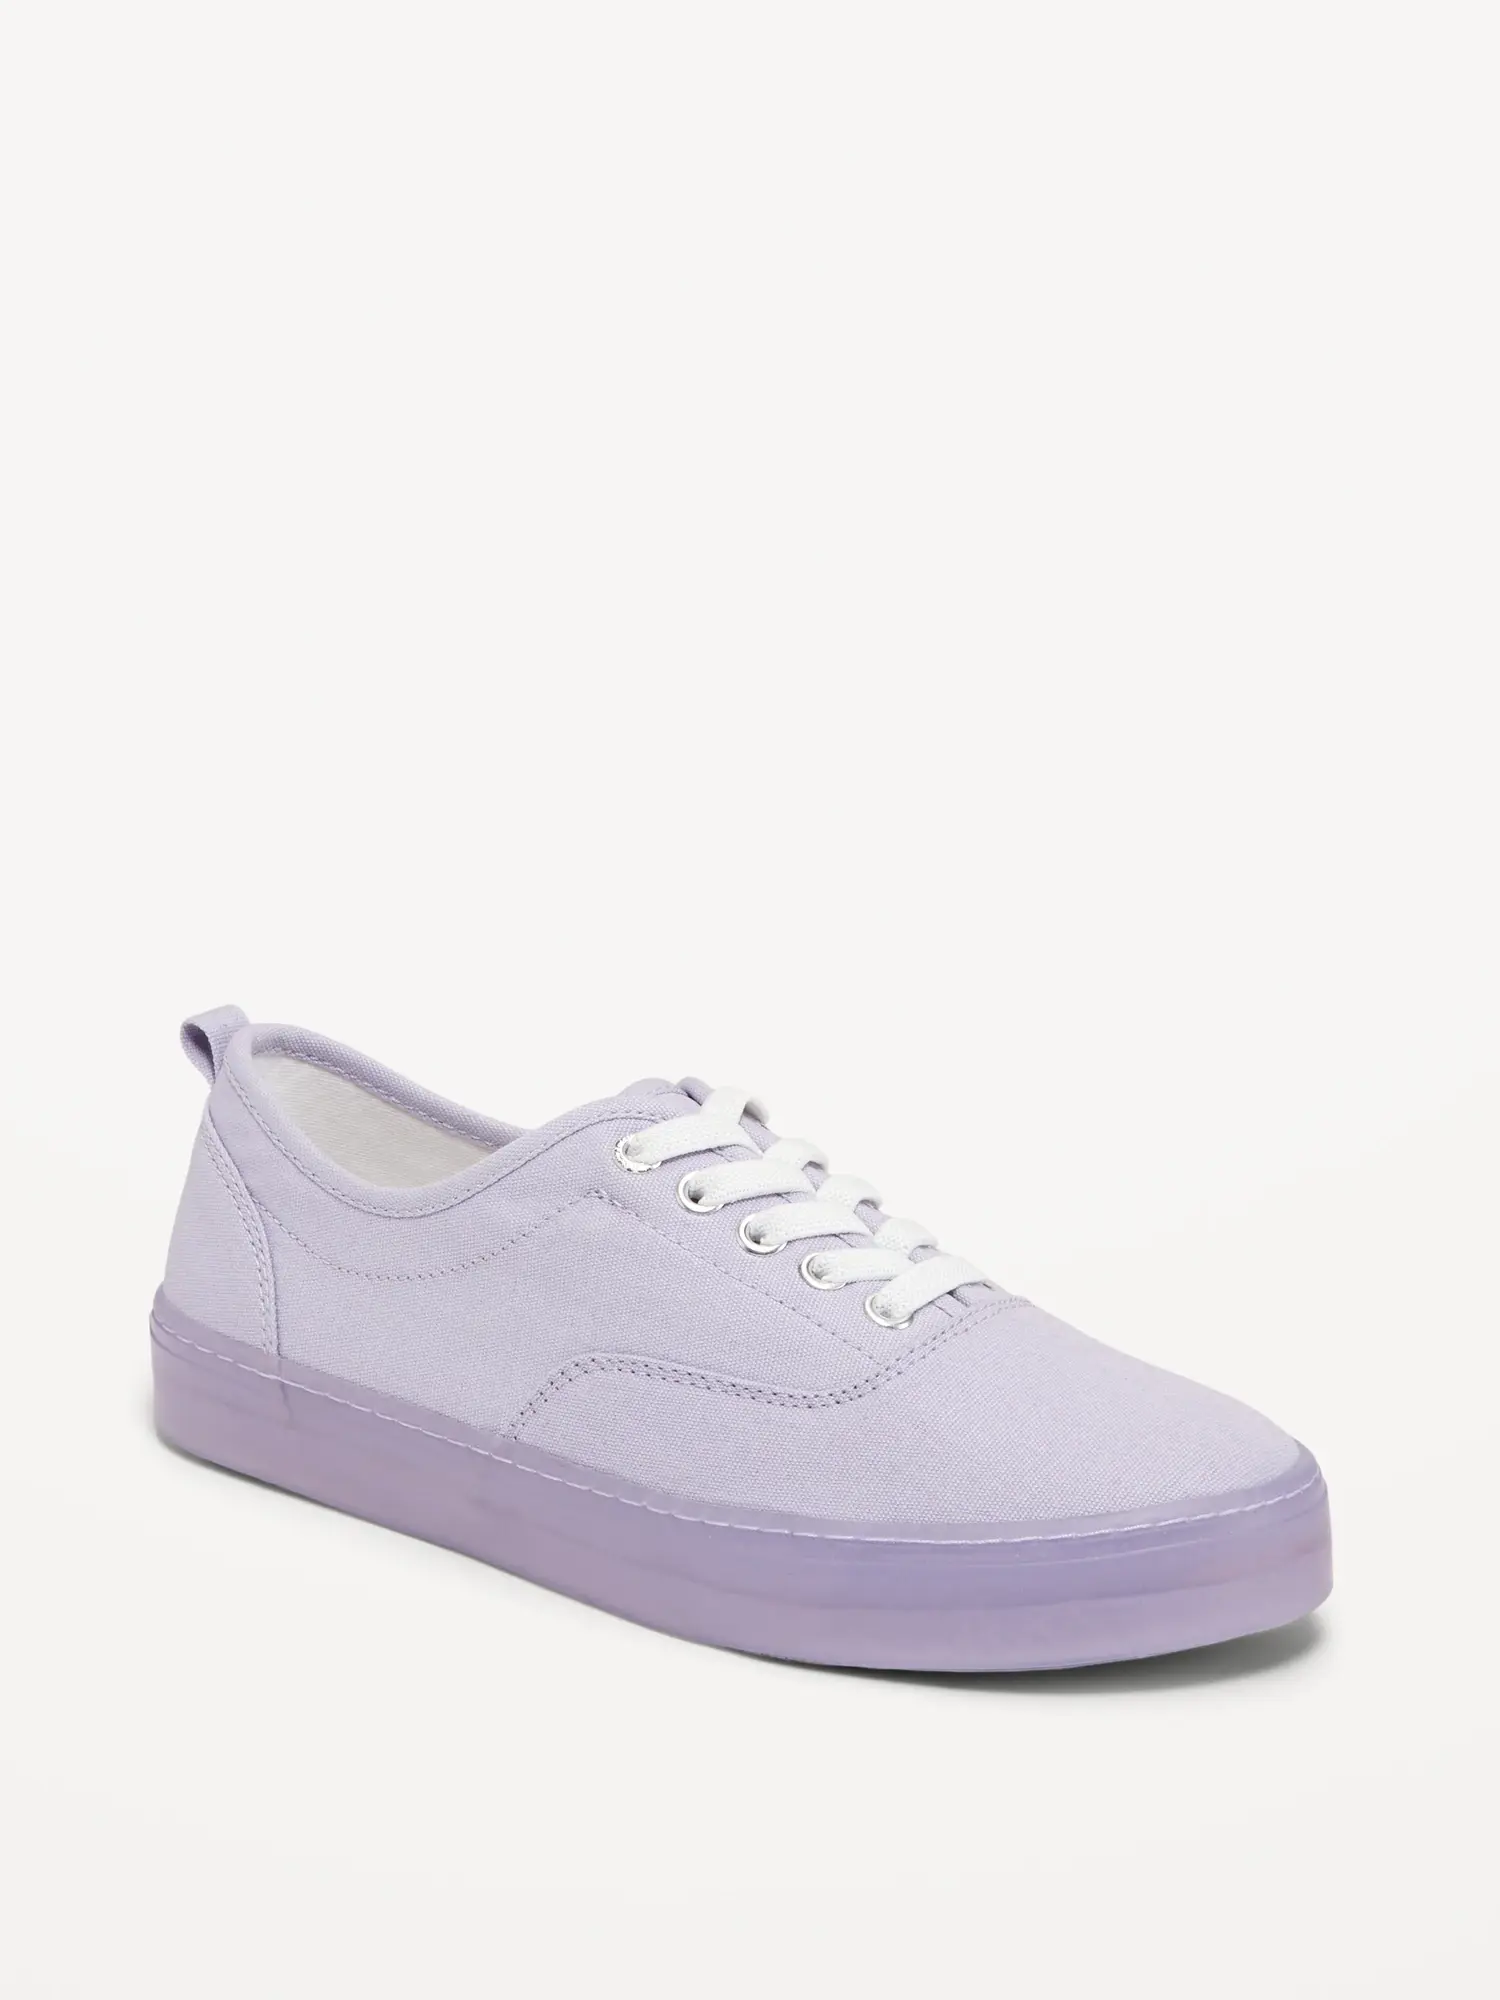 Old Navy Elastic-Lace Canvas Jelly Sneakers for Girls purple. 1